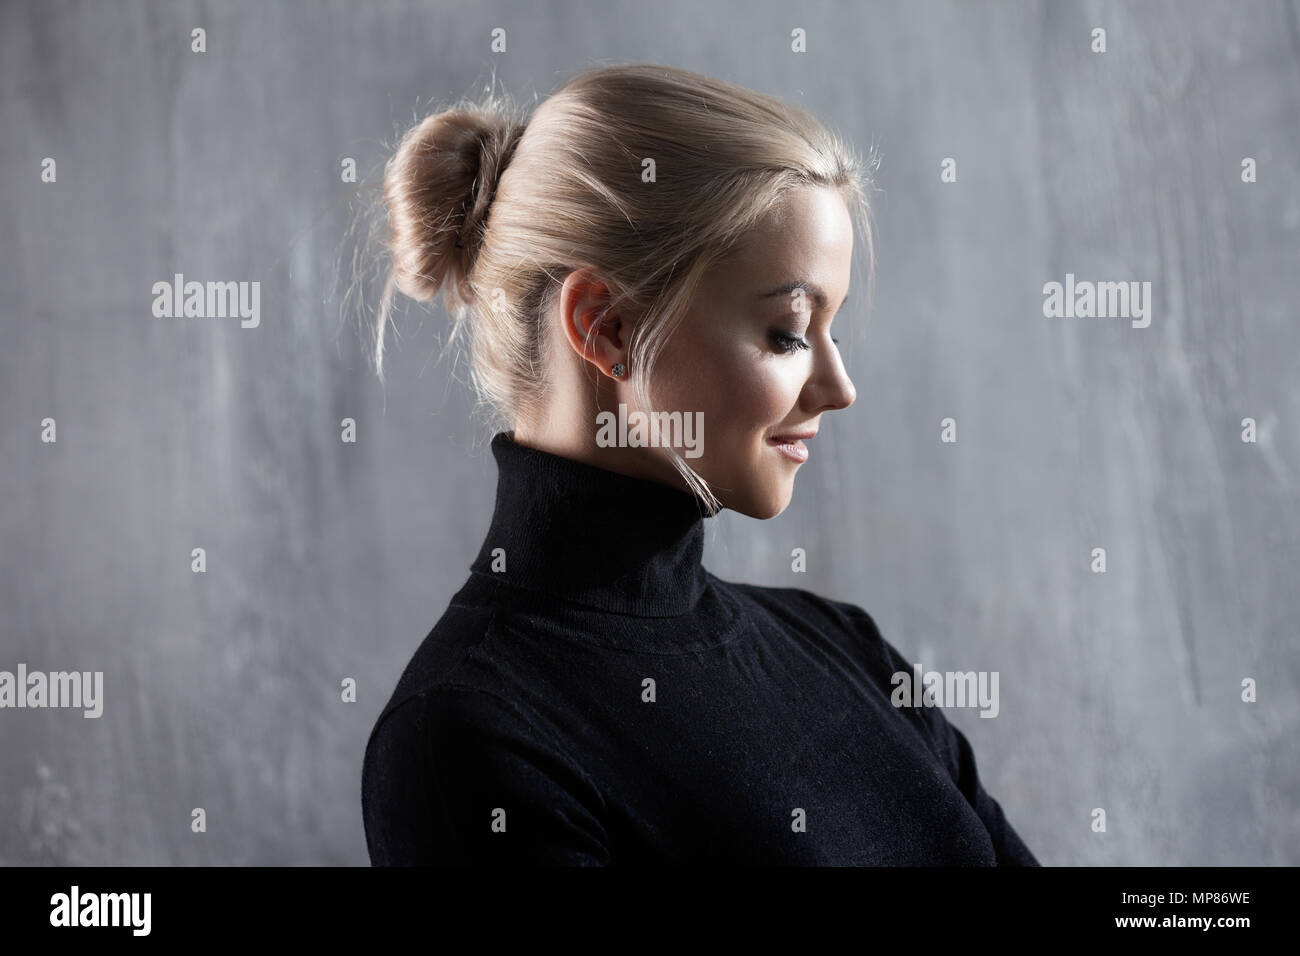 Portrait of beautiful blonde woman. Calm and self-confidence. Beautiful adult girl in black turtleneck, gray background. Stock Photo